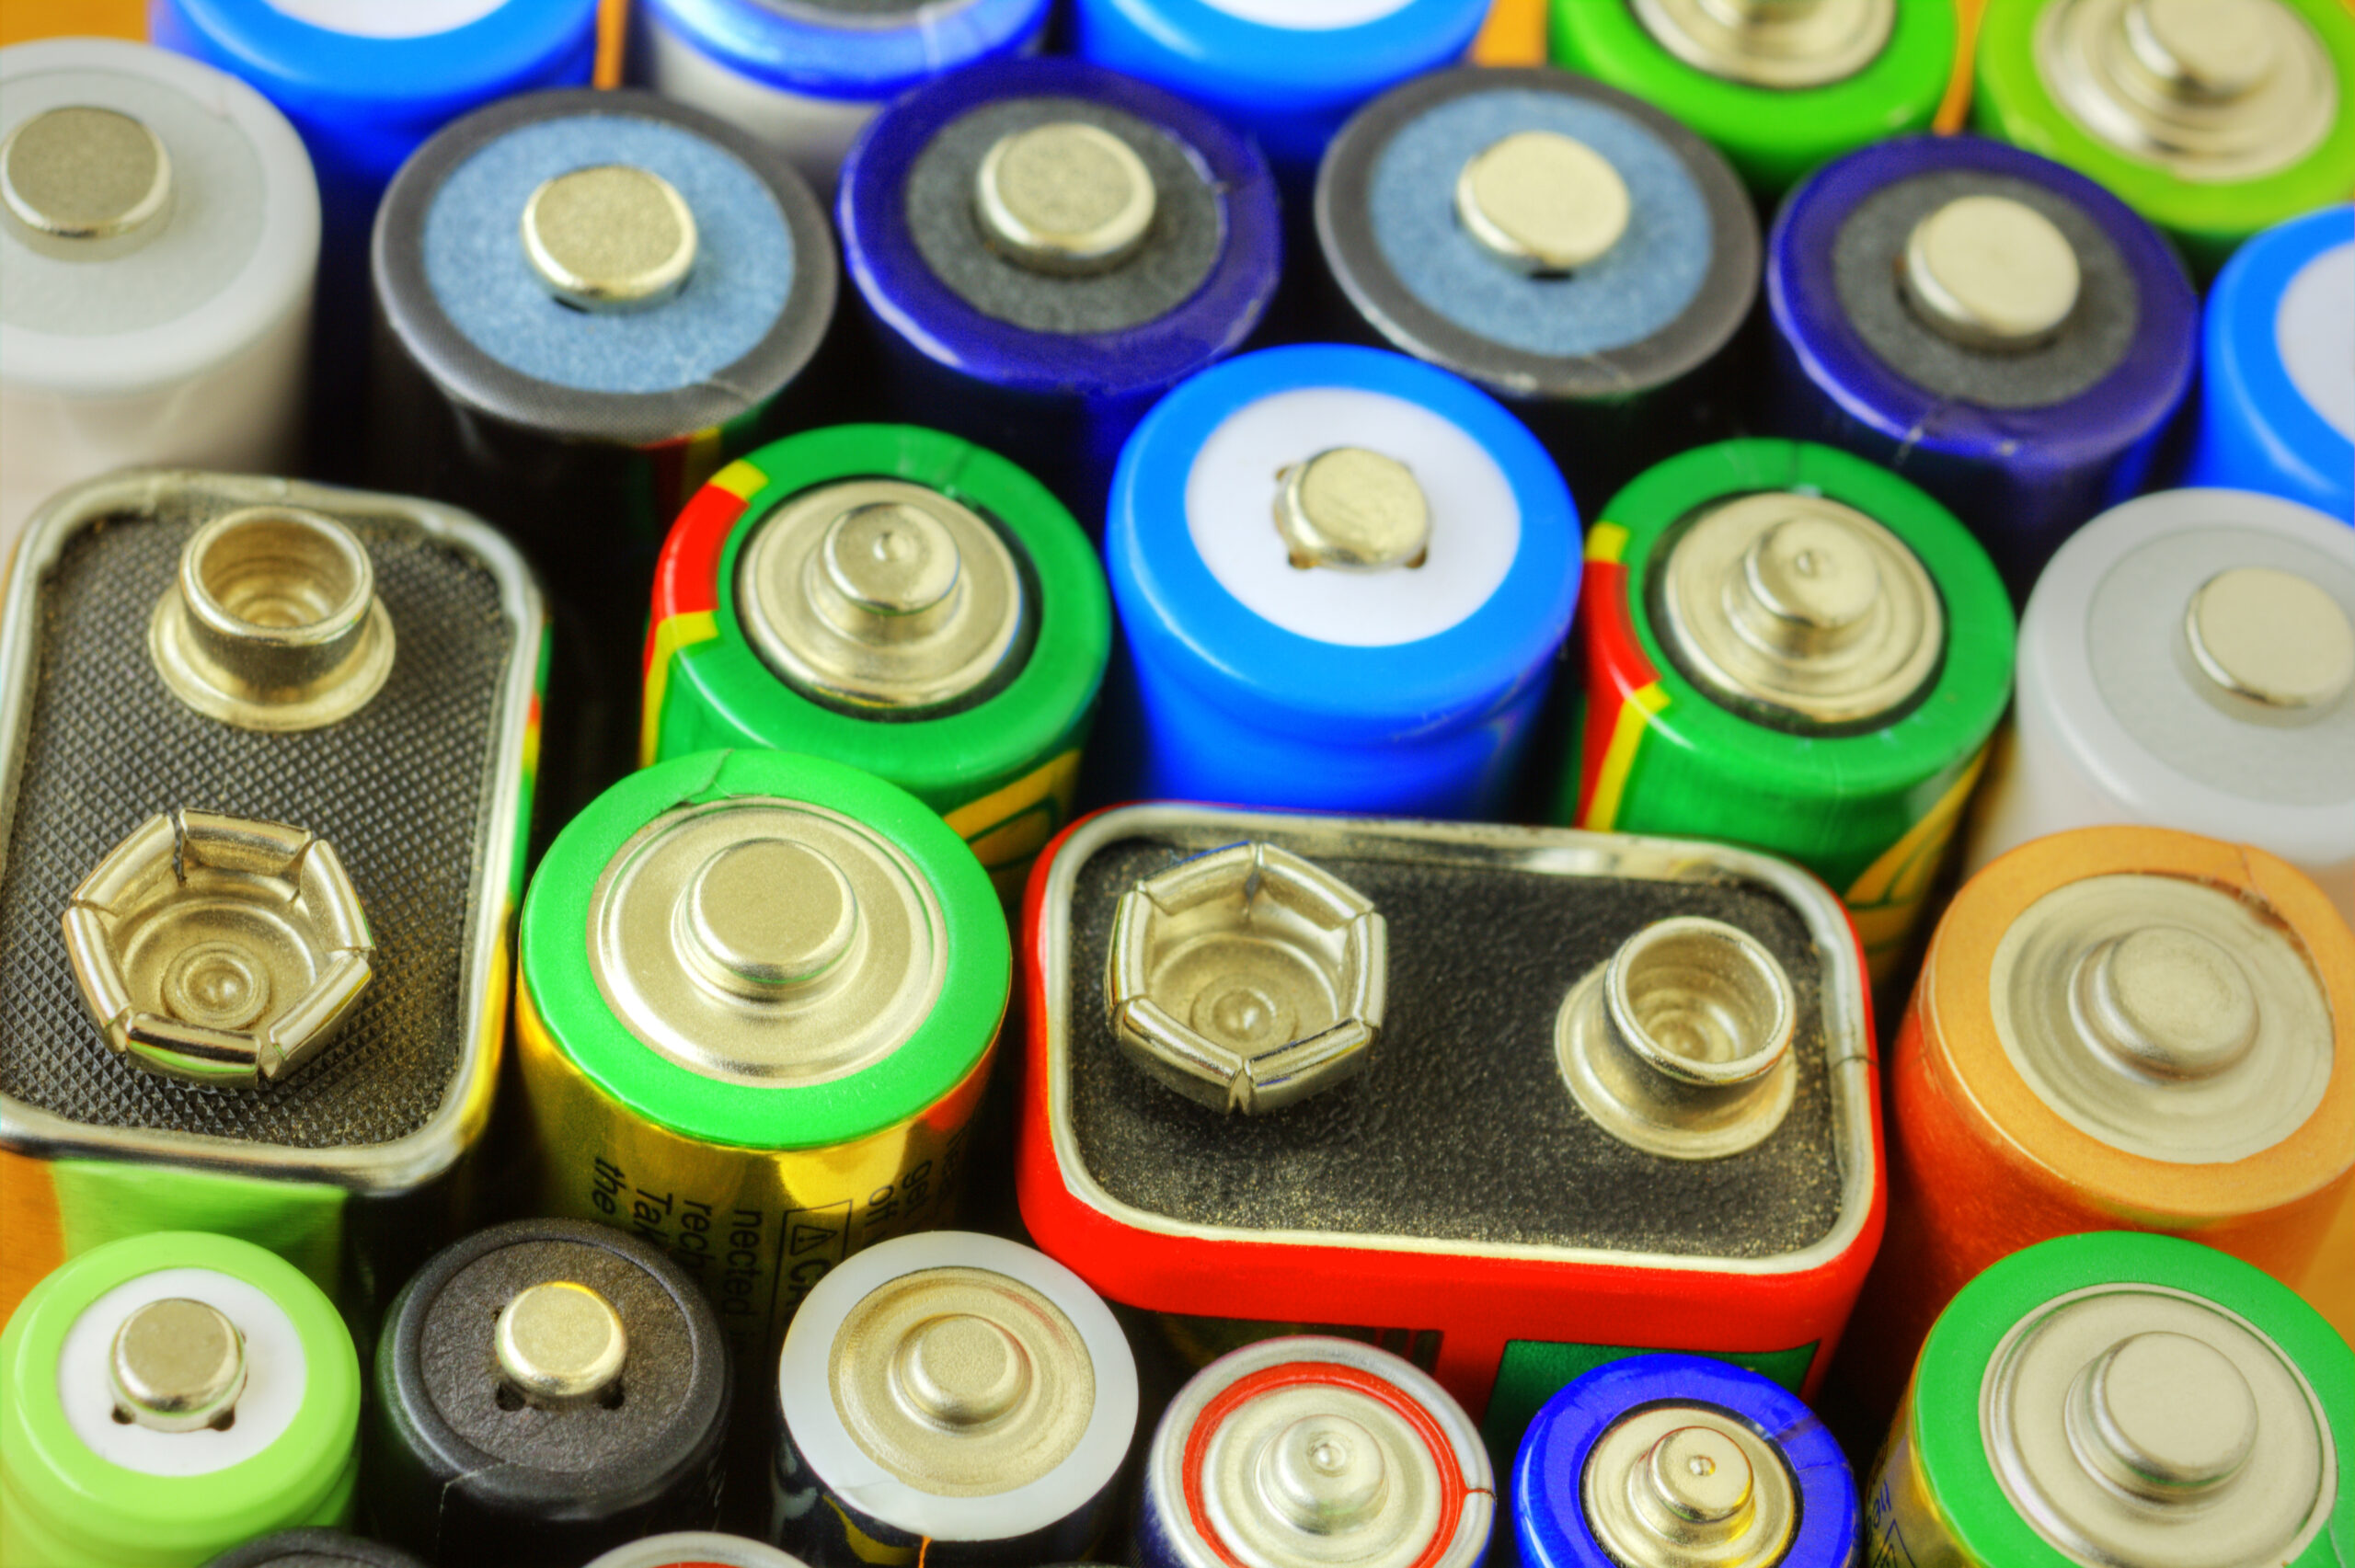 The next generation of micrometer-scale batteries